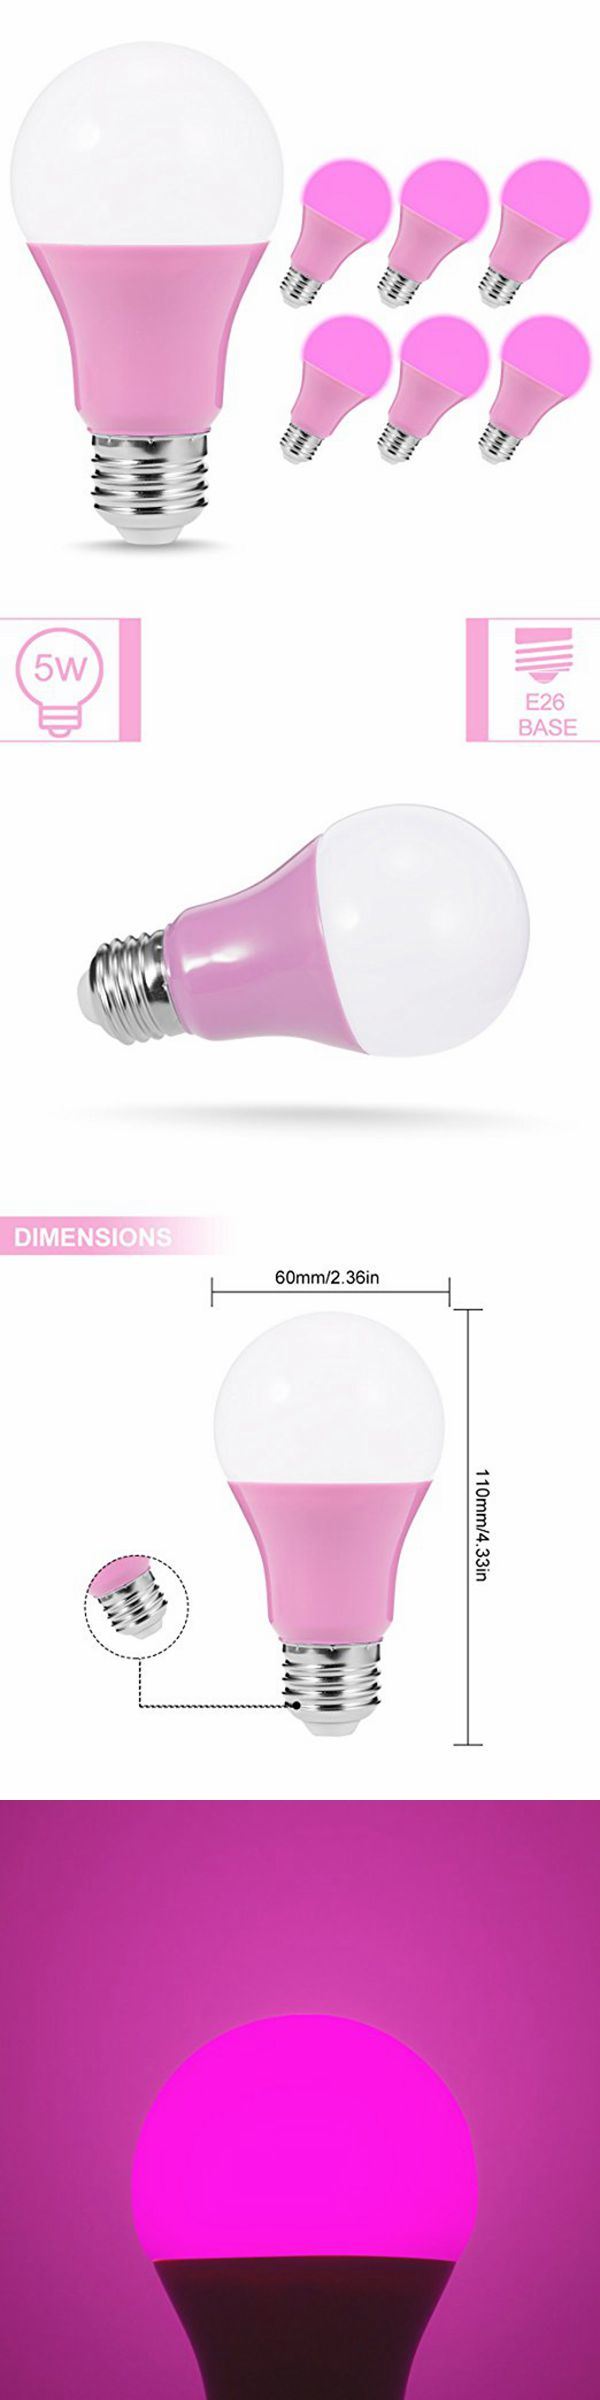 5W E26 LED Pink Light Bulbs 40W Equivalent Pink LED Chips A19 Light Bulbs for Decoration